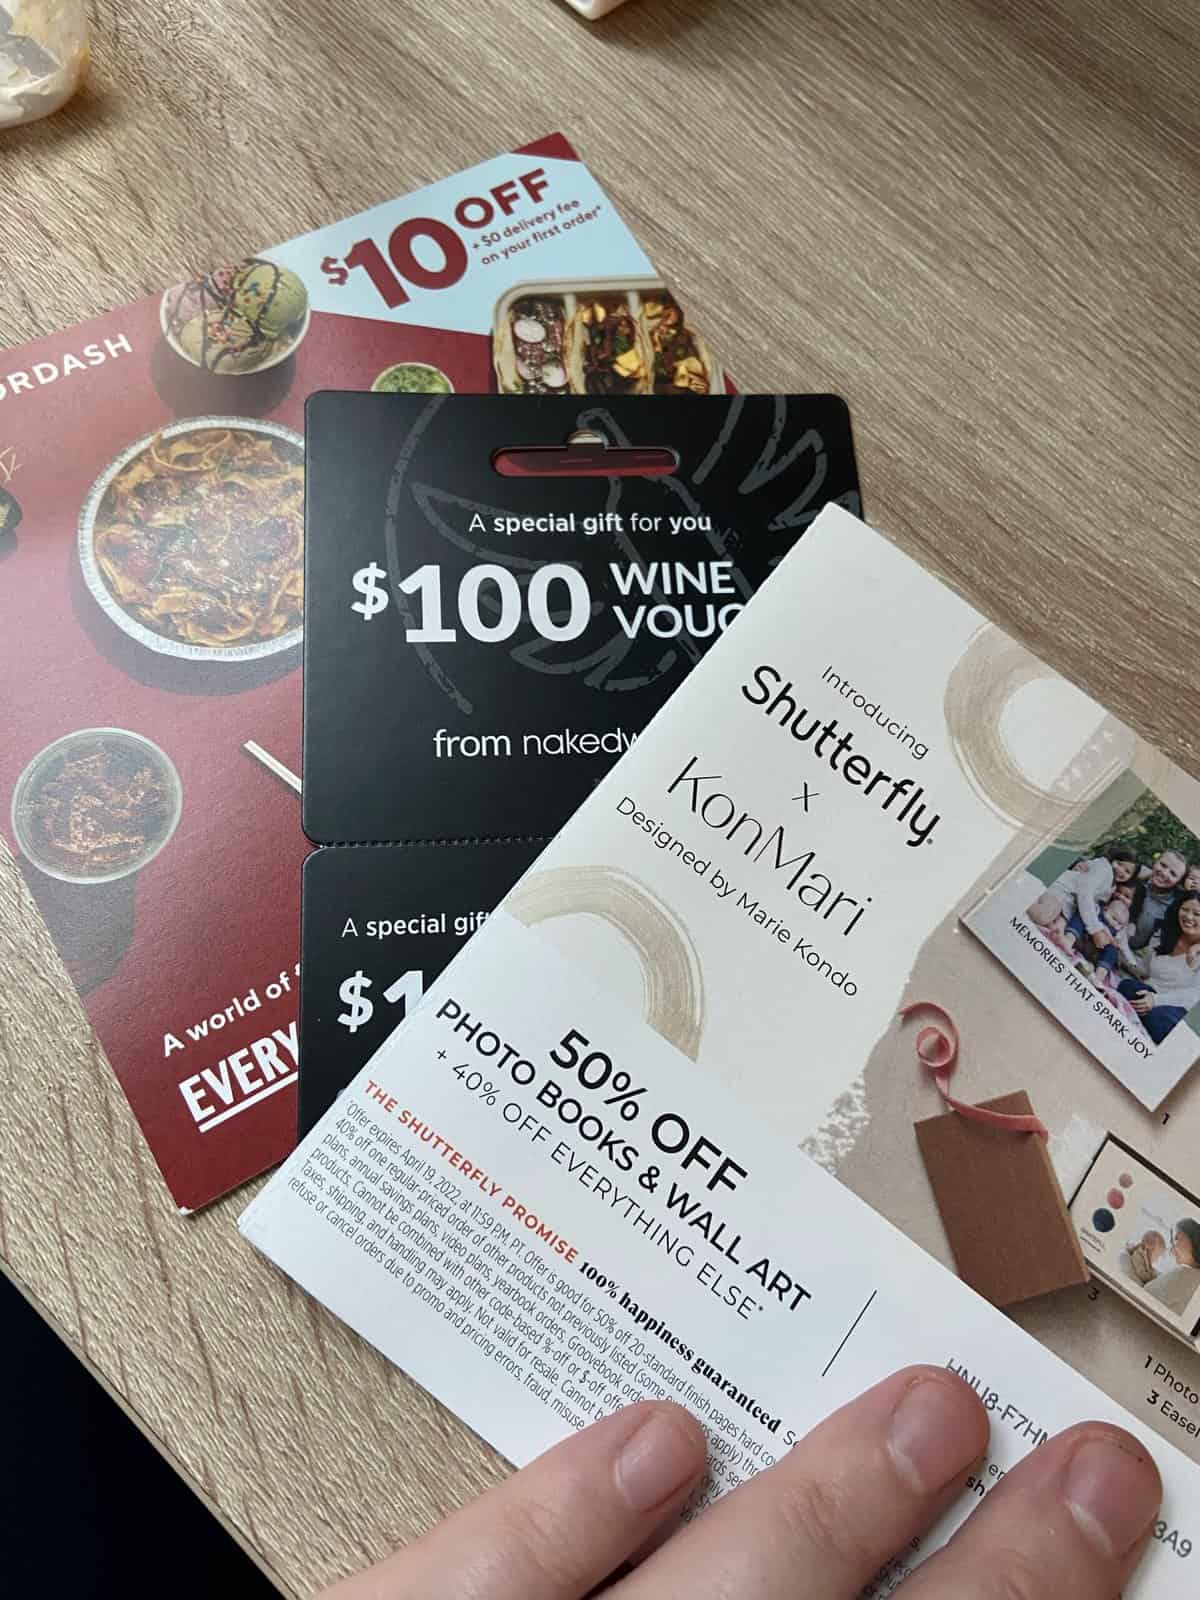 Gift cards from Shutterfly